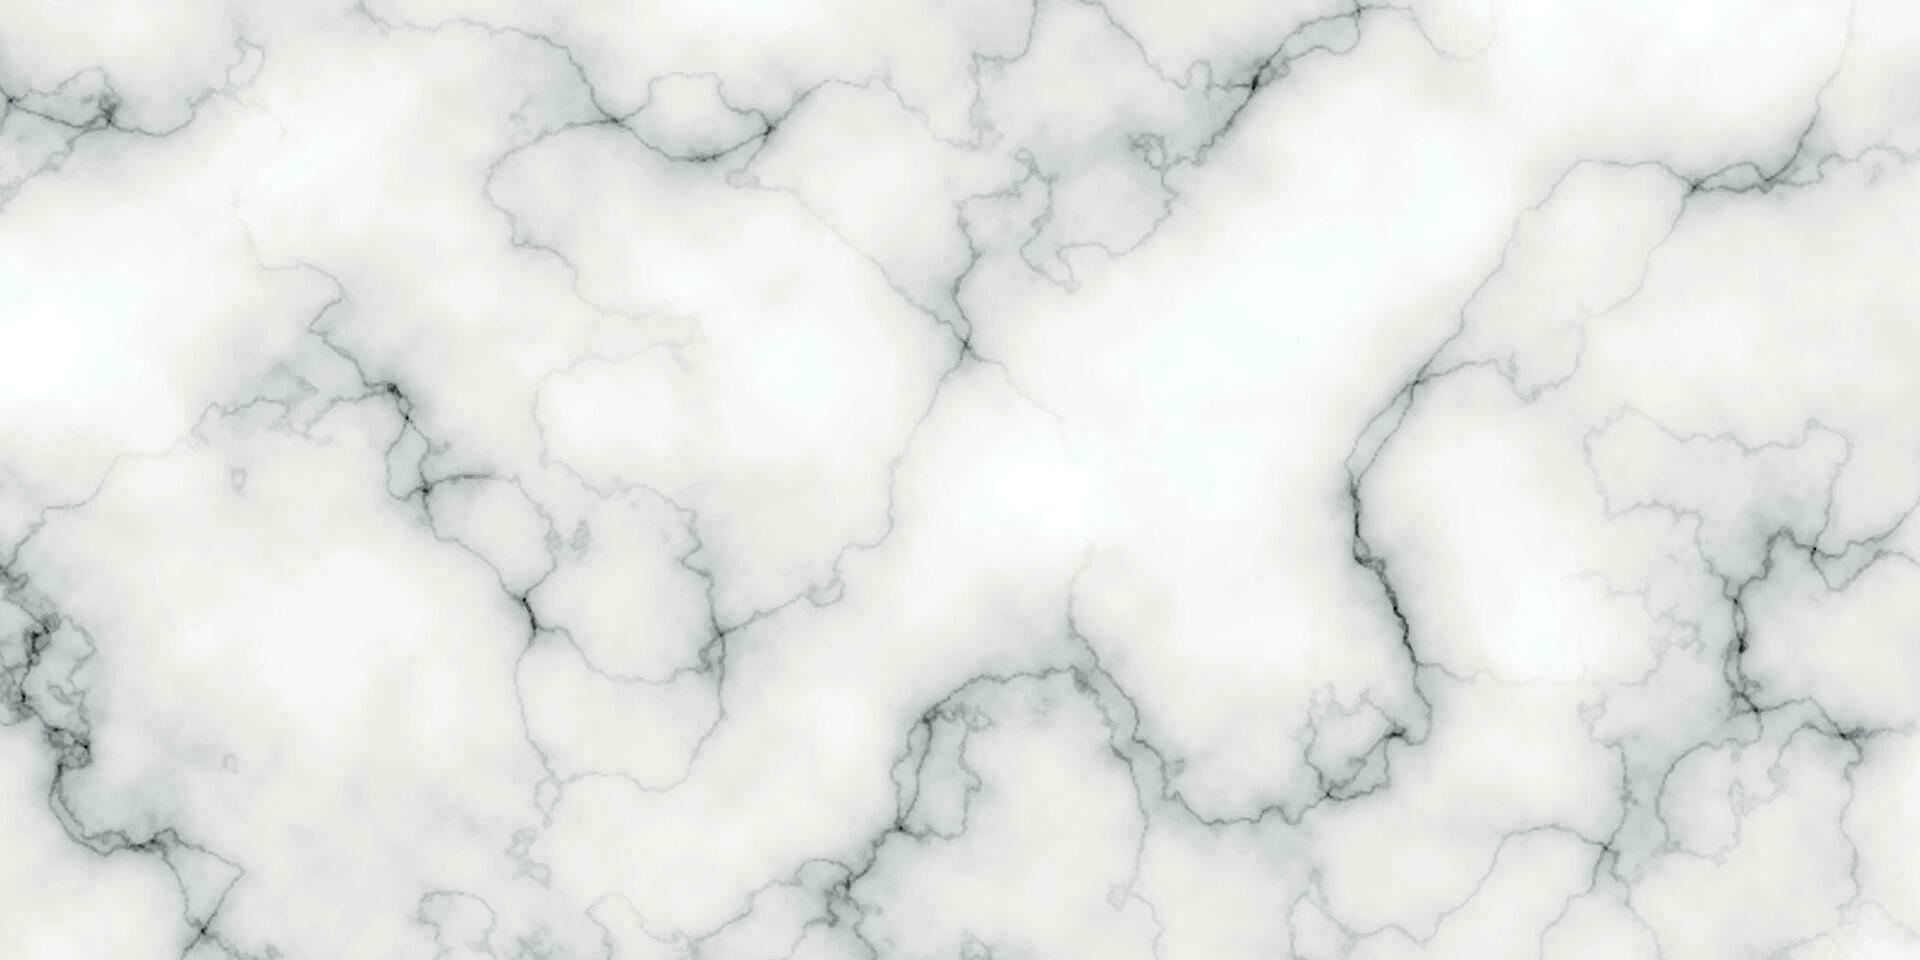 White Marble Texture. Natural White Marble Tiles. Seamless Pattern of Tile Stone Background. Luxury White Marbling Design vector